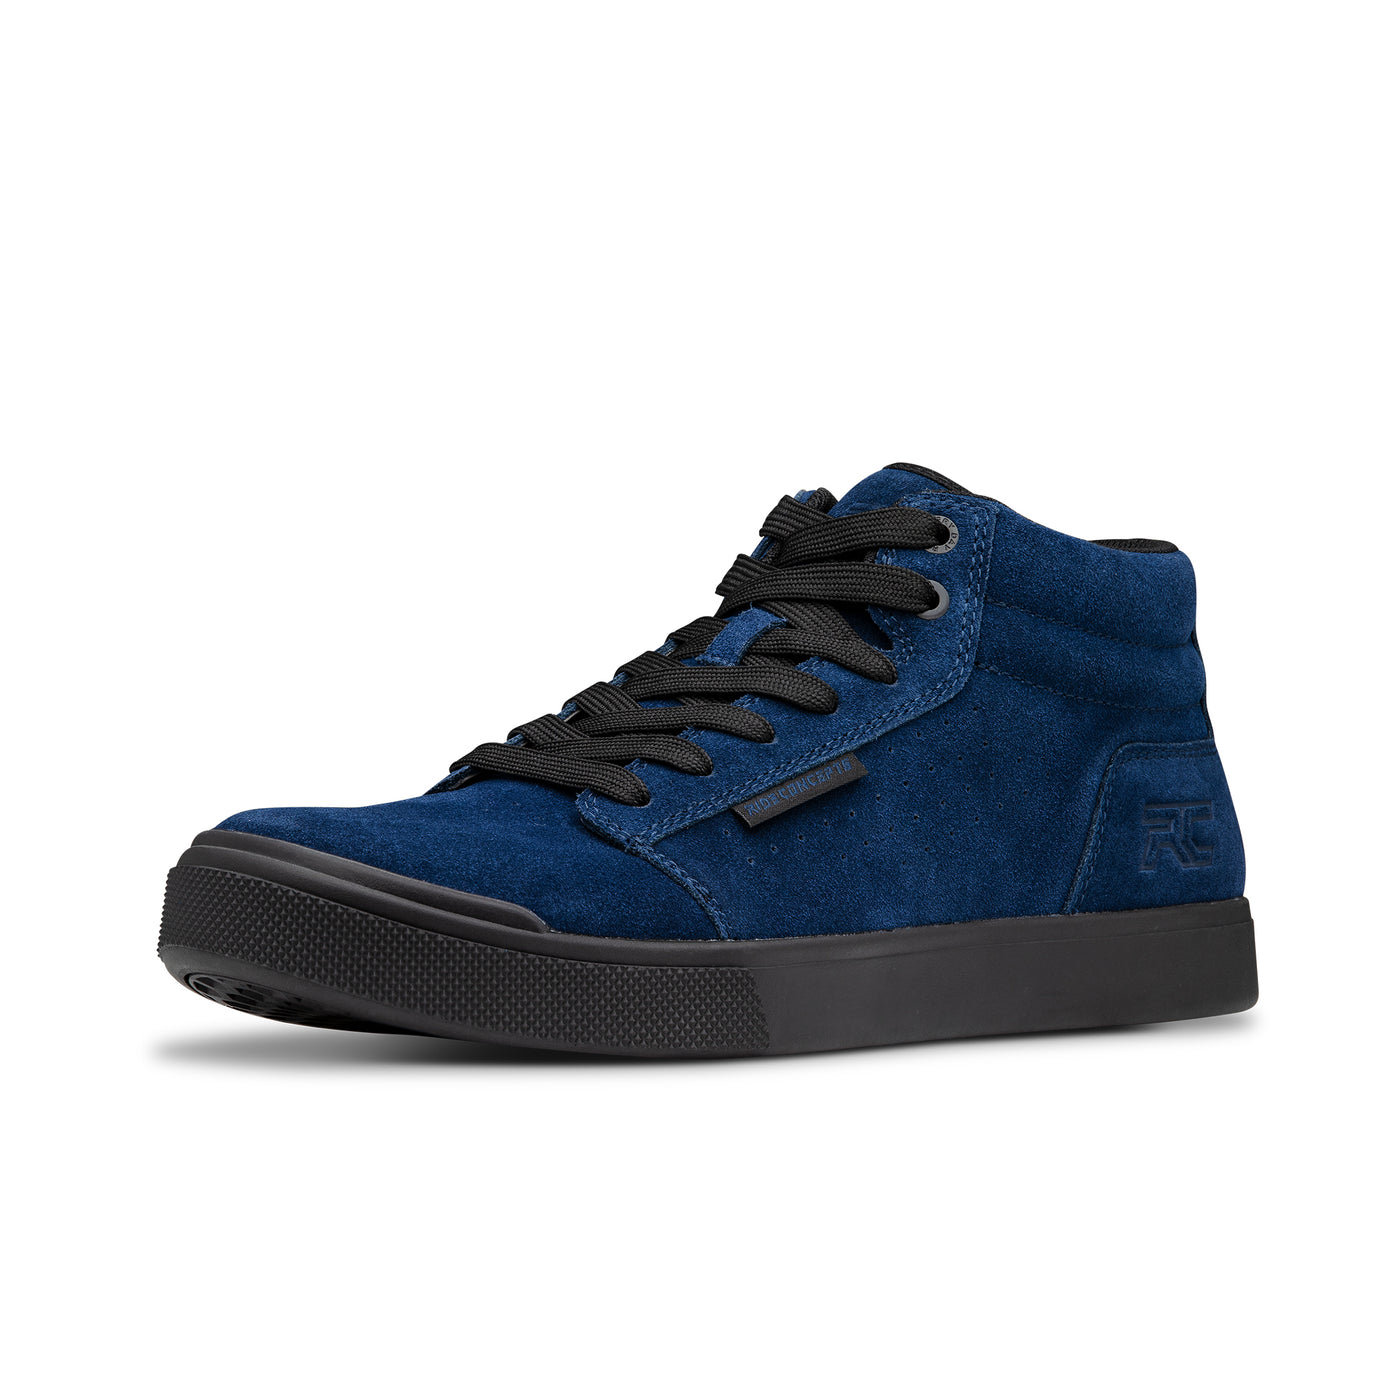 Ride Concepts Men's Vice Mid MTB Shoe - Navy and Black